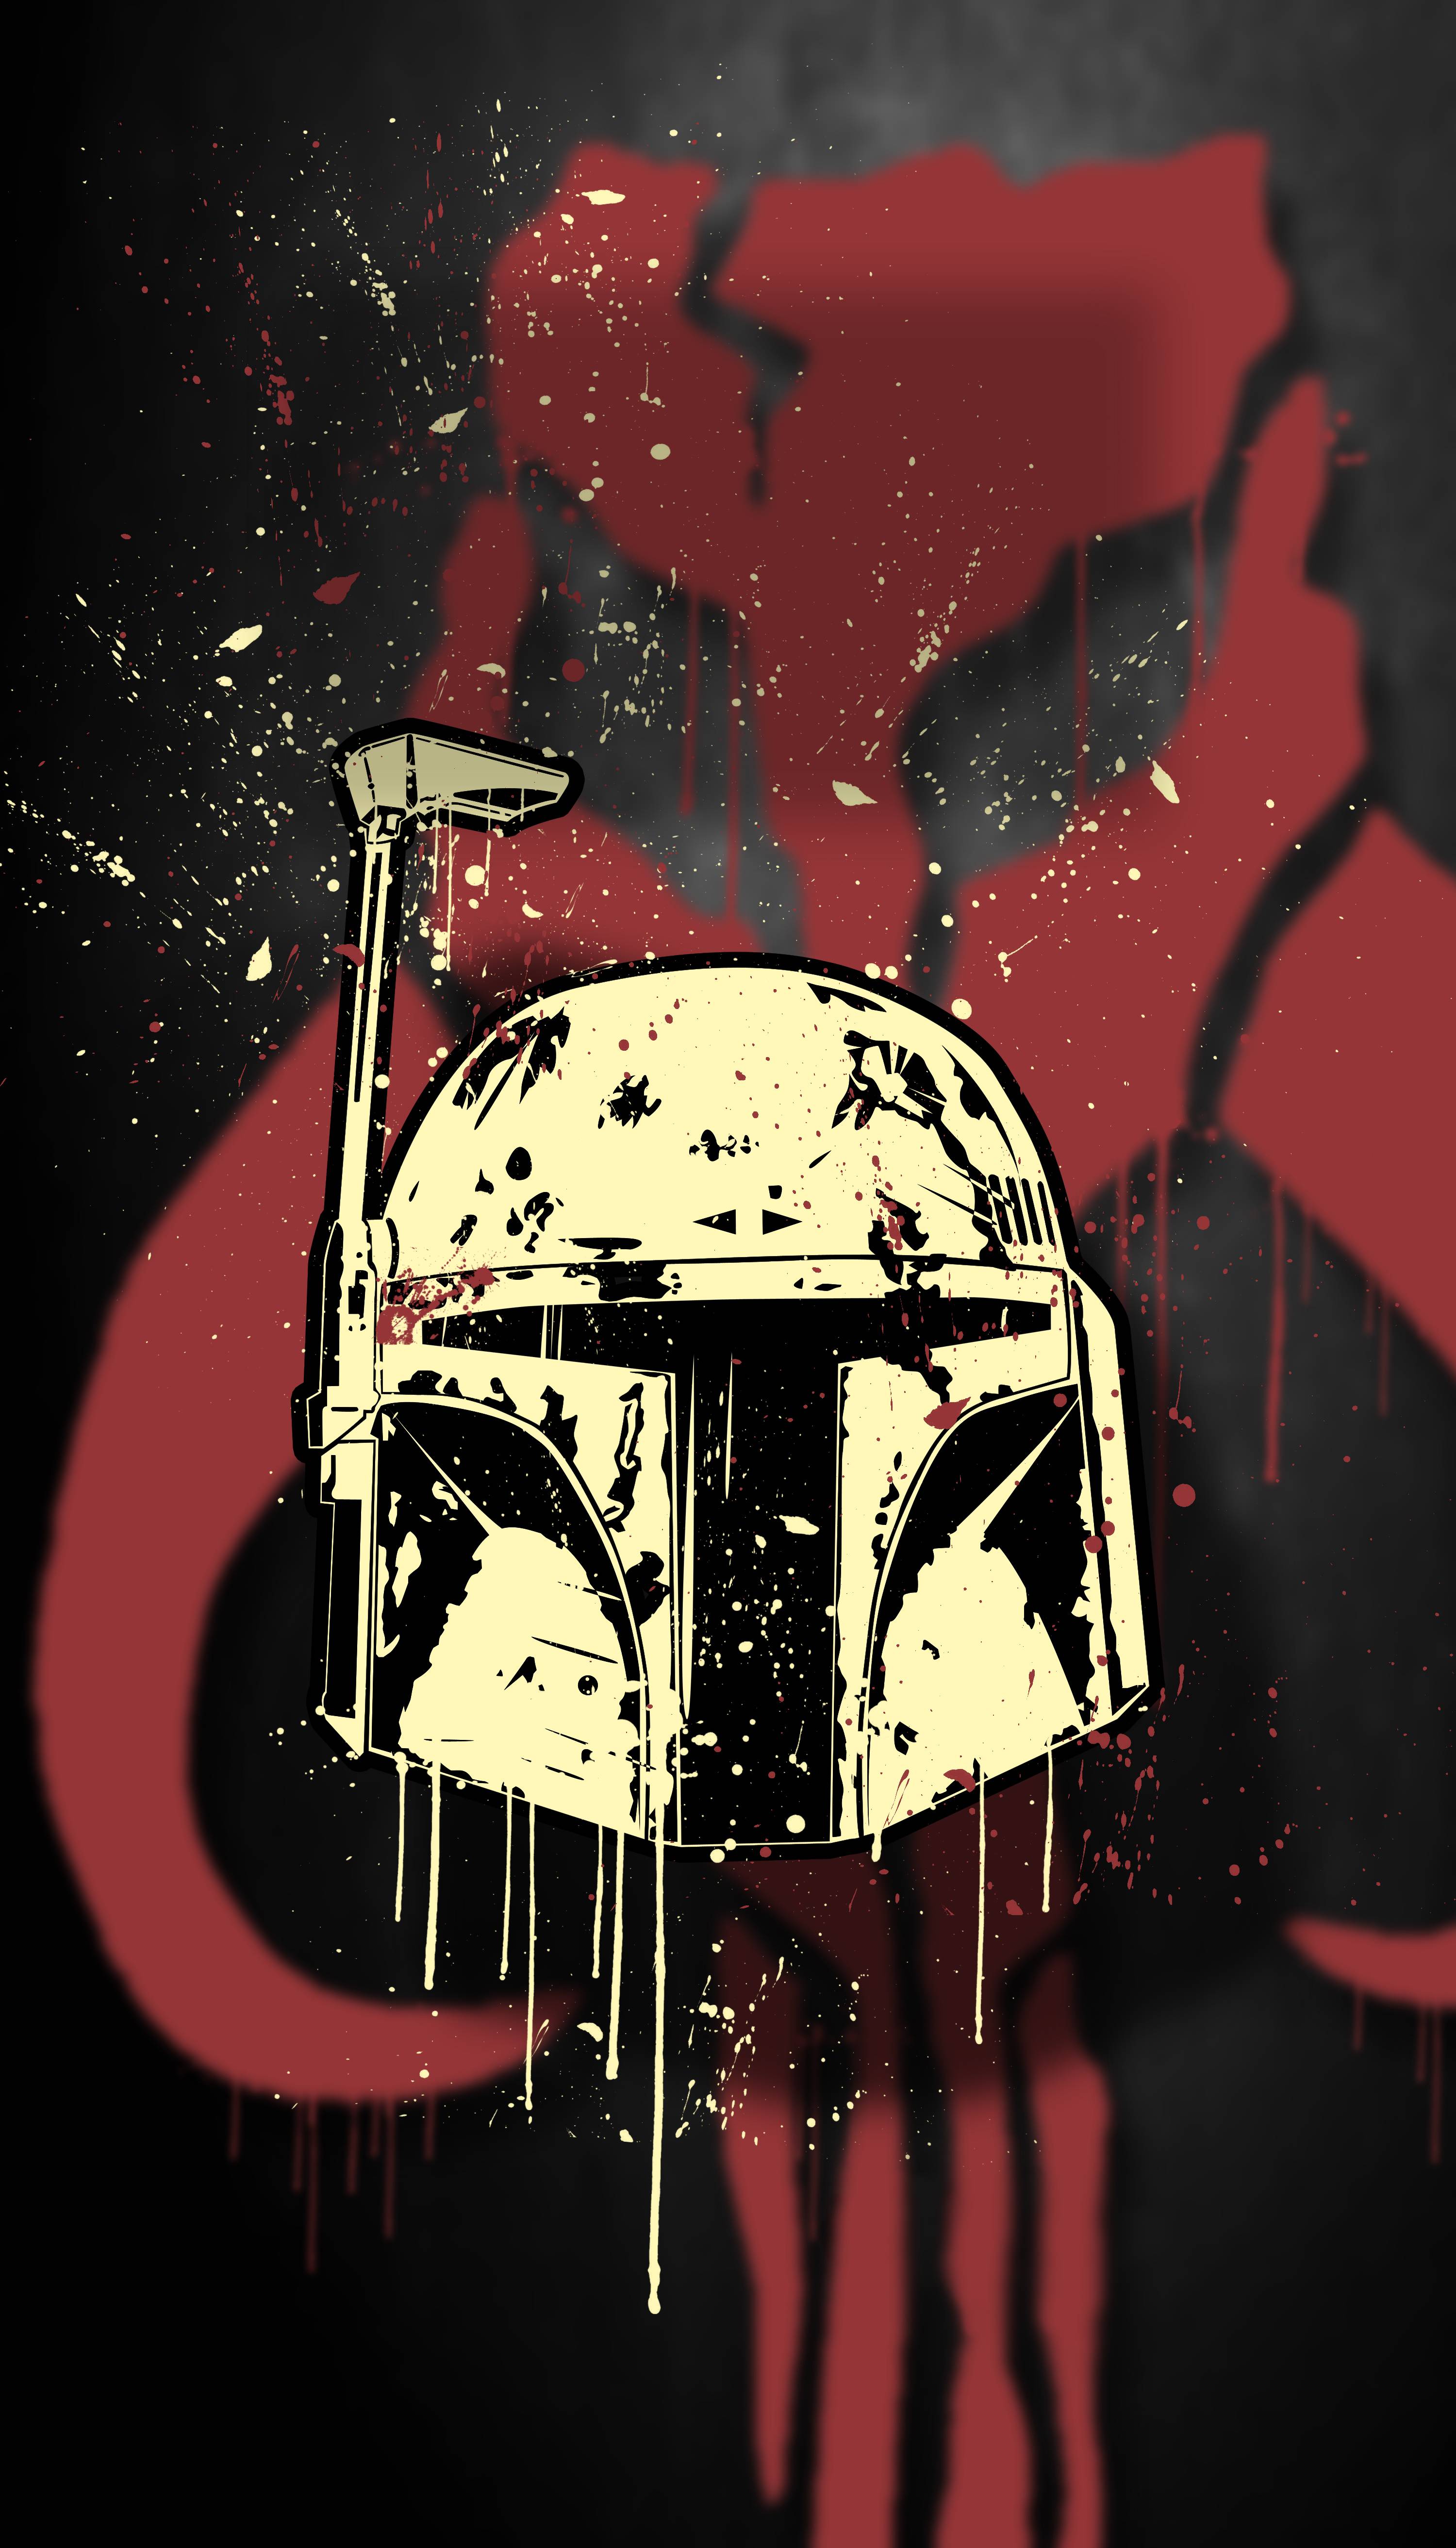 Made a Boba Fett phone wallpapers for anyone who wants it [3000